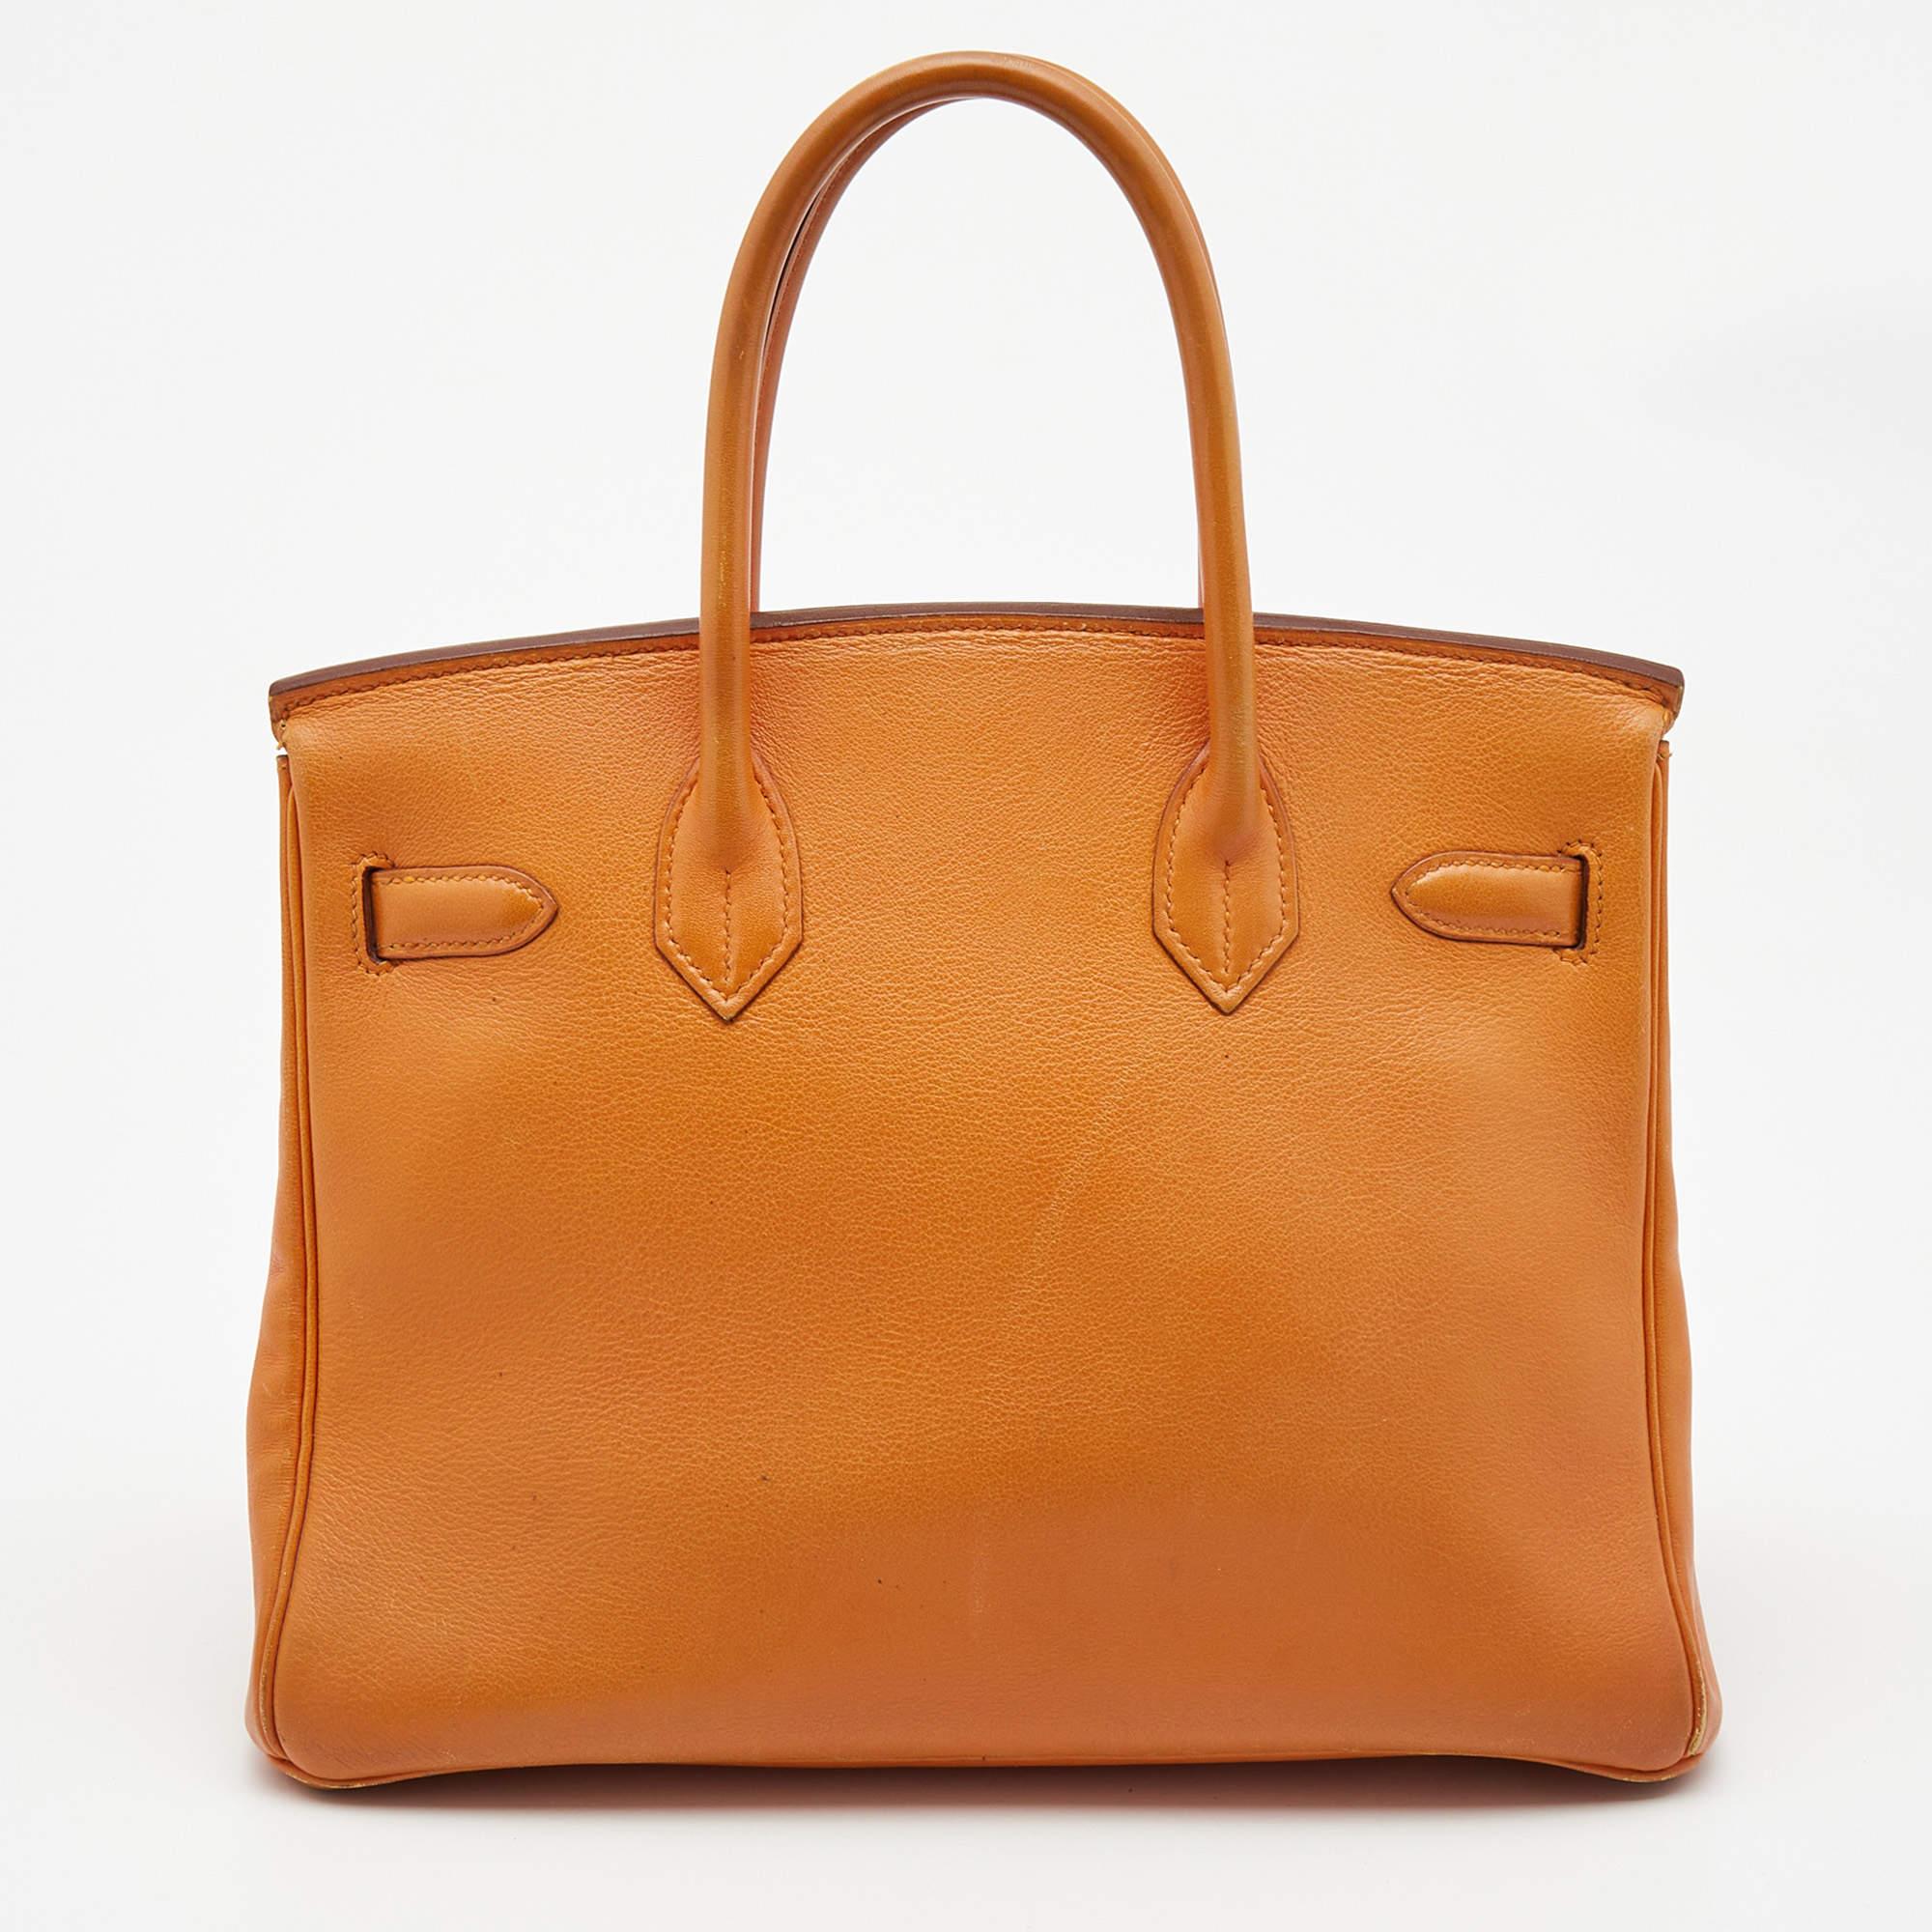 For those wishing to own an authentic Birkin bag, there is no better time to buy this coveted work of art than now. Here, we have this Birkin 30 just for you. Crafted in France, the bag features dual top handles and a matching clochette. The bag